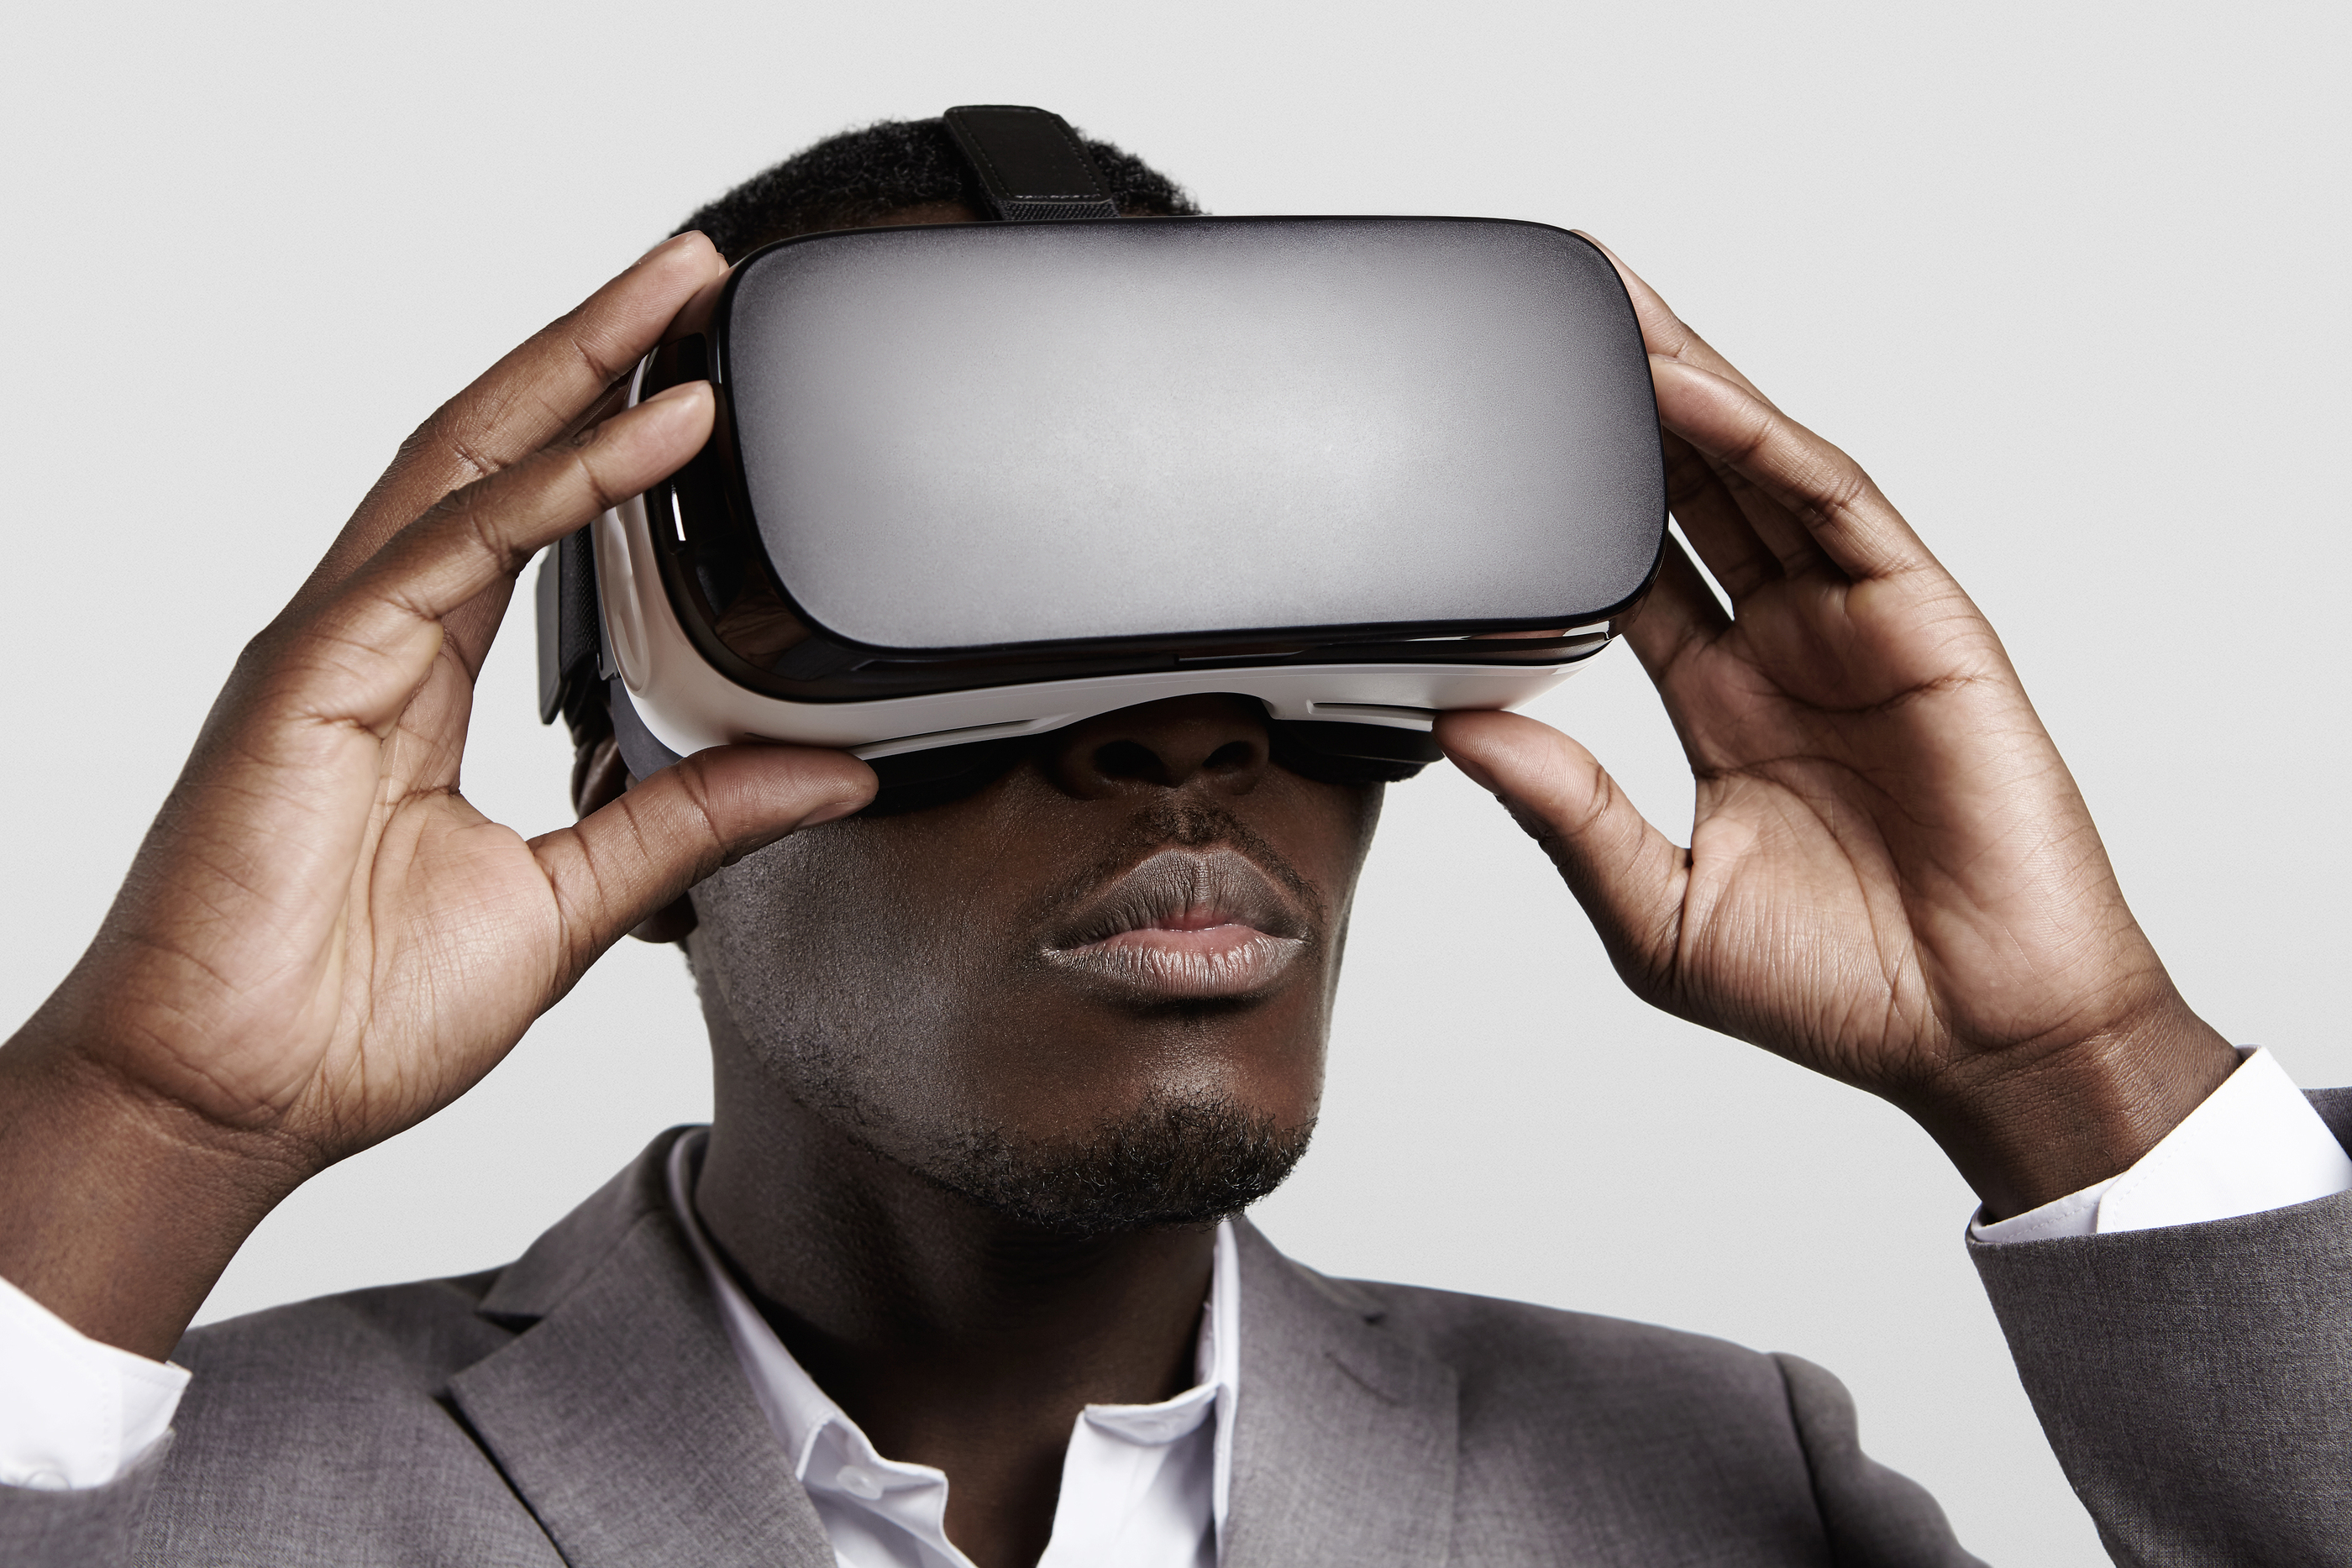 3d technology virtual reality entertainment cyberspace concept. Young dark-skinned entrepreneur wearing formal suit using oculus rift headset with head-mounted display playing video game in office